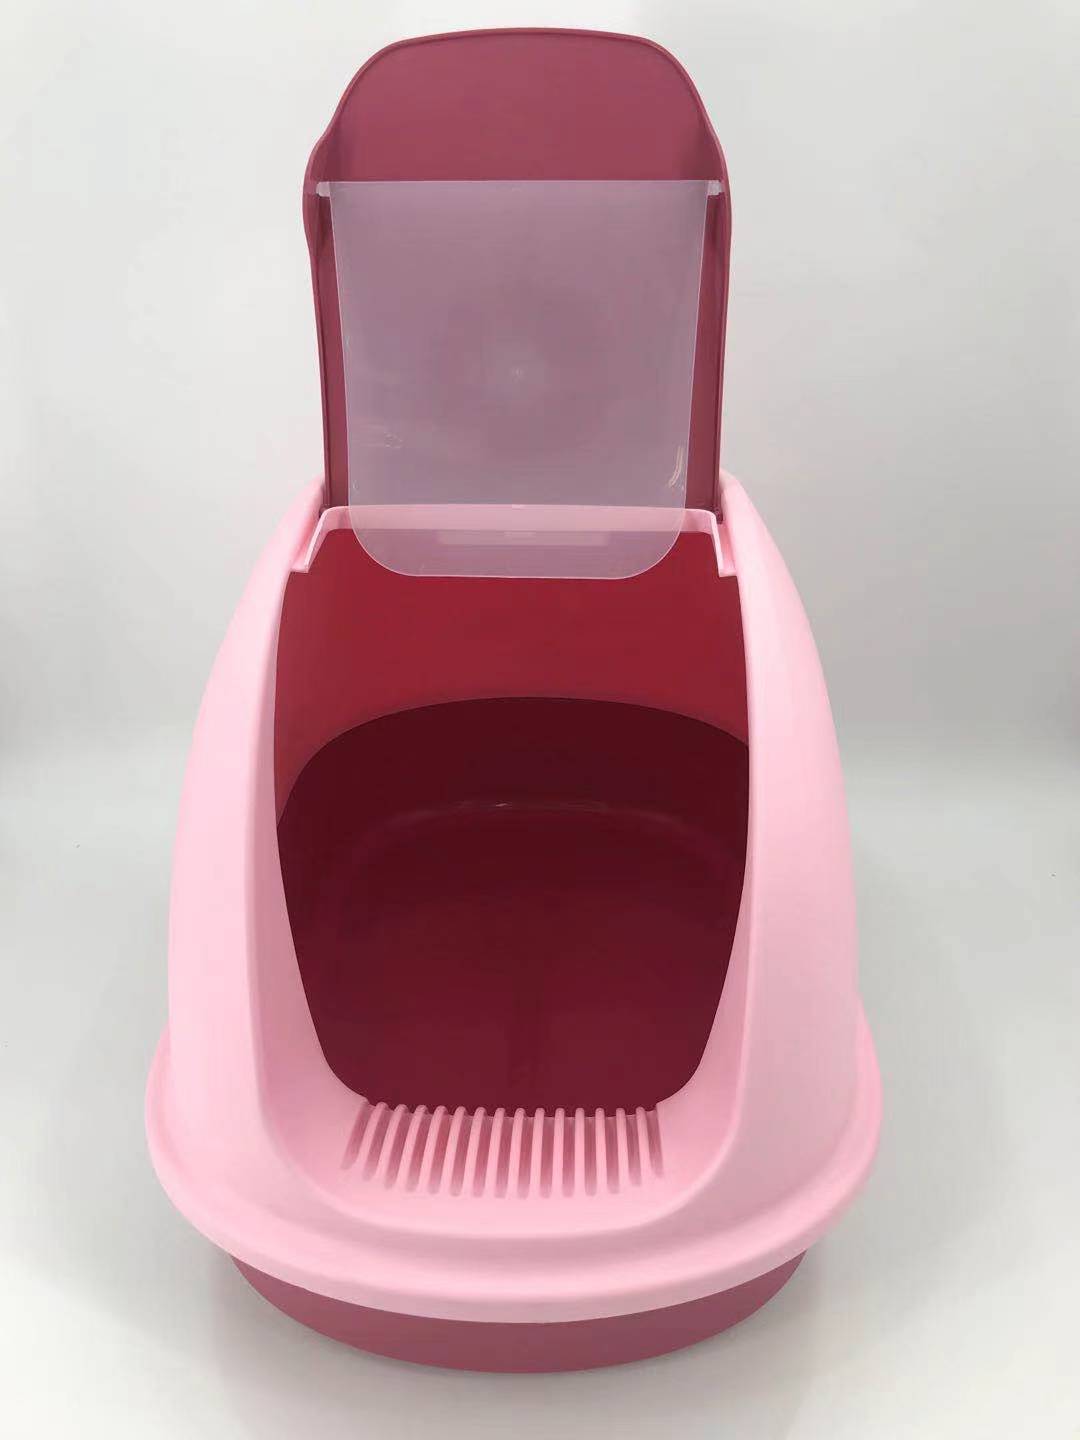 YES4PETS XL Portable Hooded Cat Toilet Litter Box Tray House with Charcoal Filter and Scoop Pink